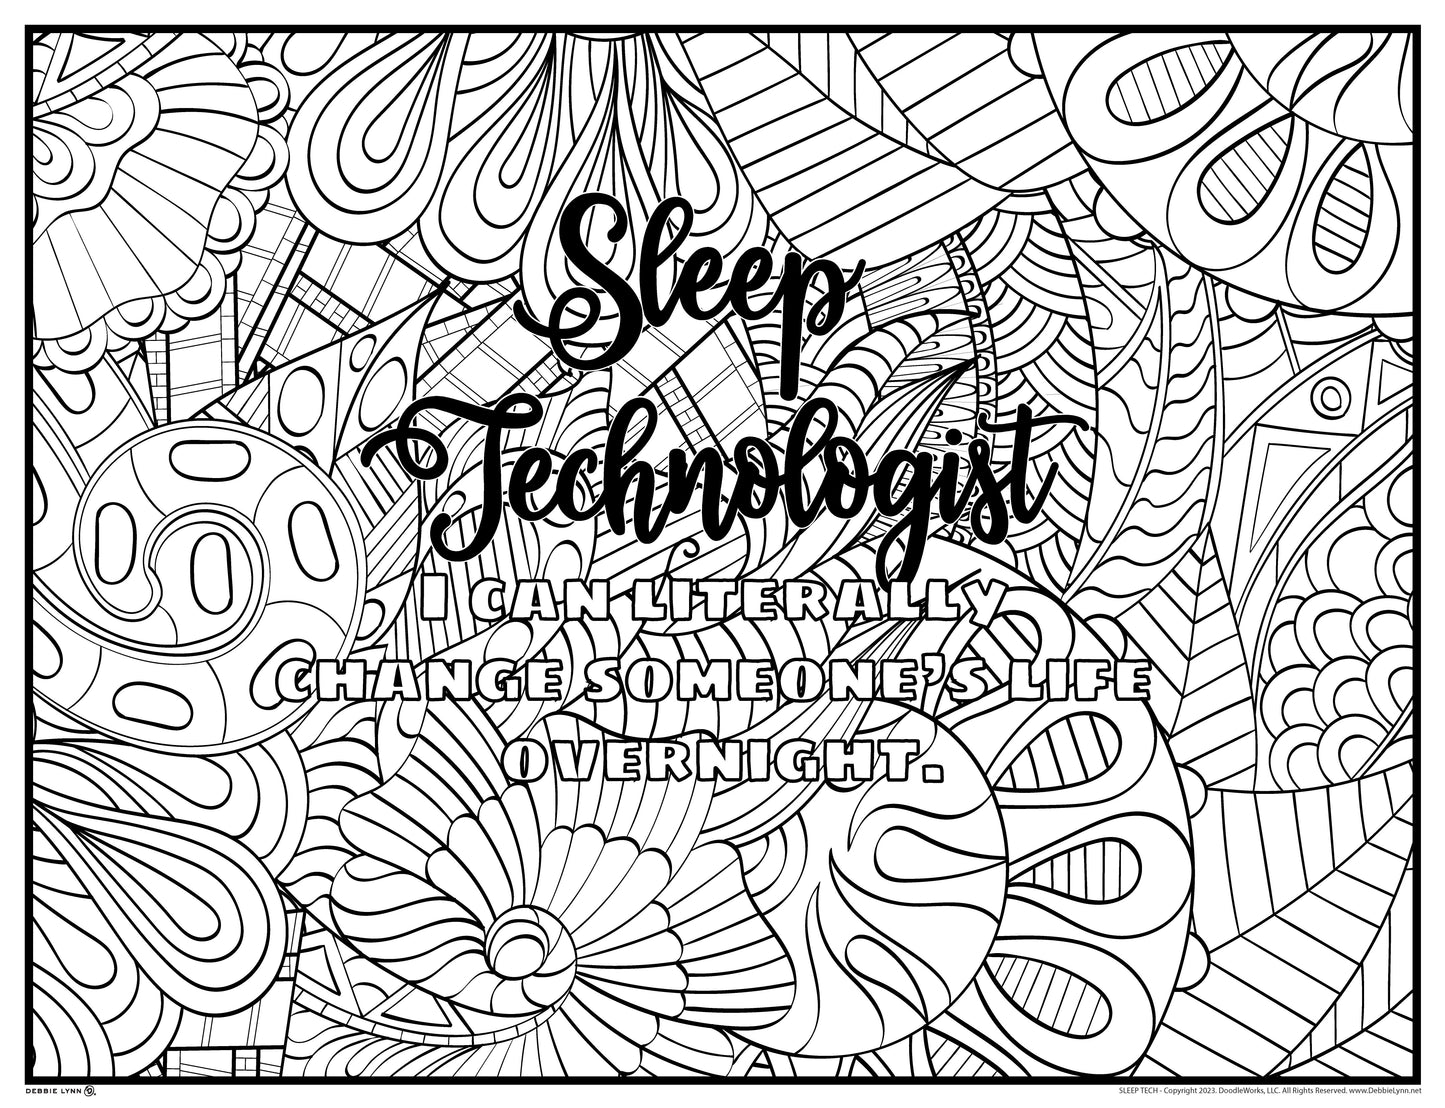 Sleep Technologist Personalized Giant Coloring Poster 46"x60"